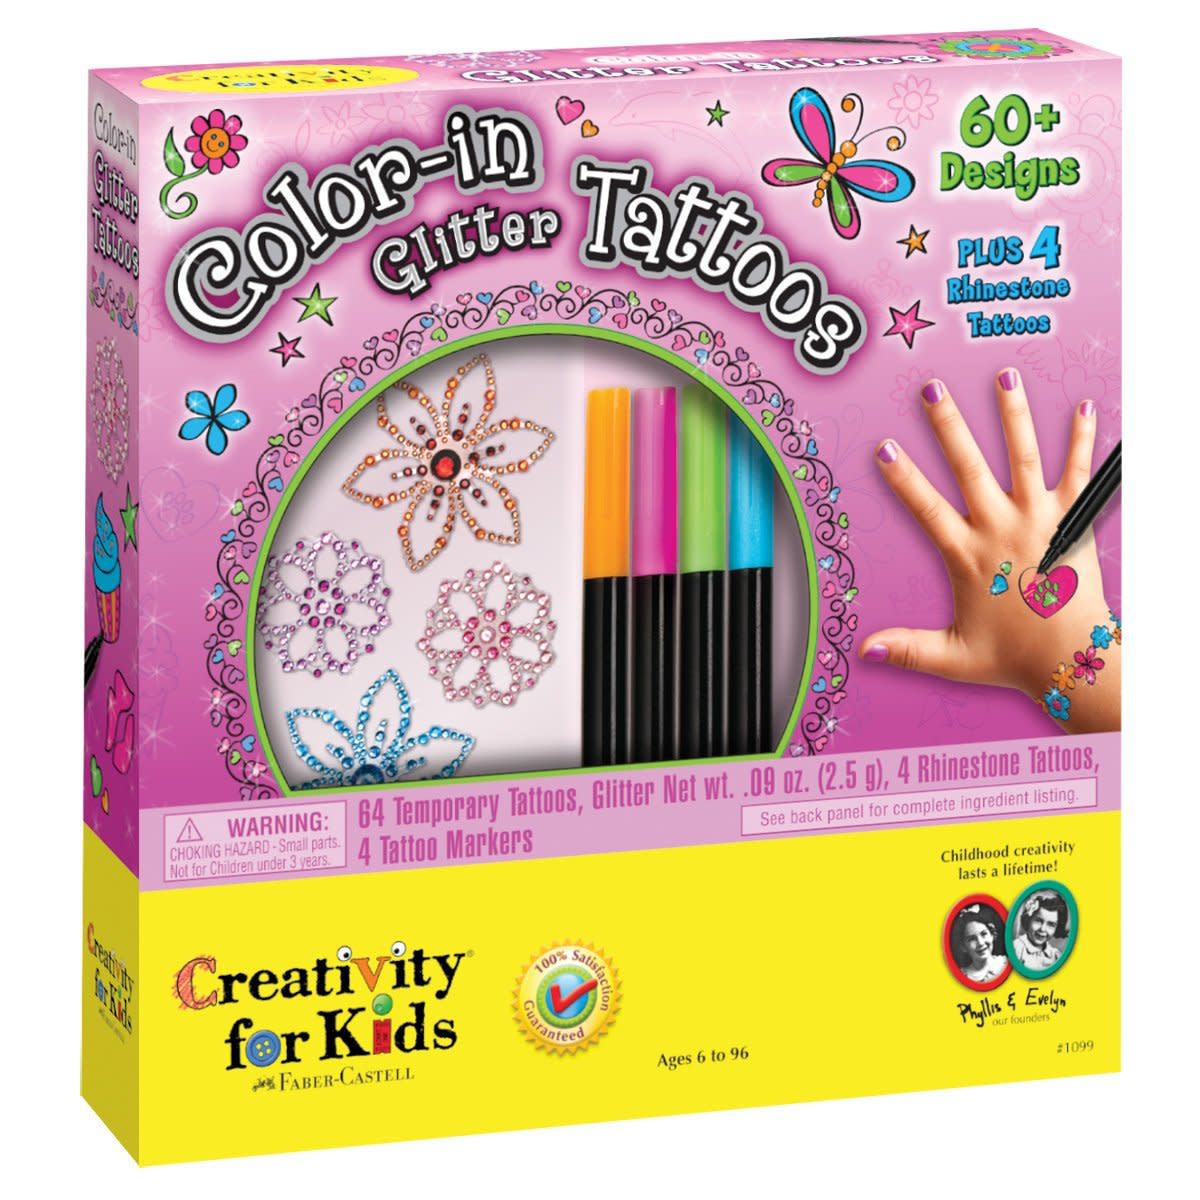 Color-in-tatoos are an age appropriate gift for a 5 year old girl. (Unfortunately!!)